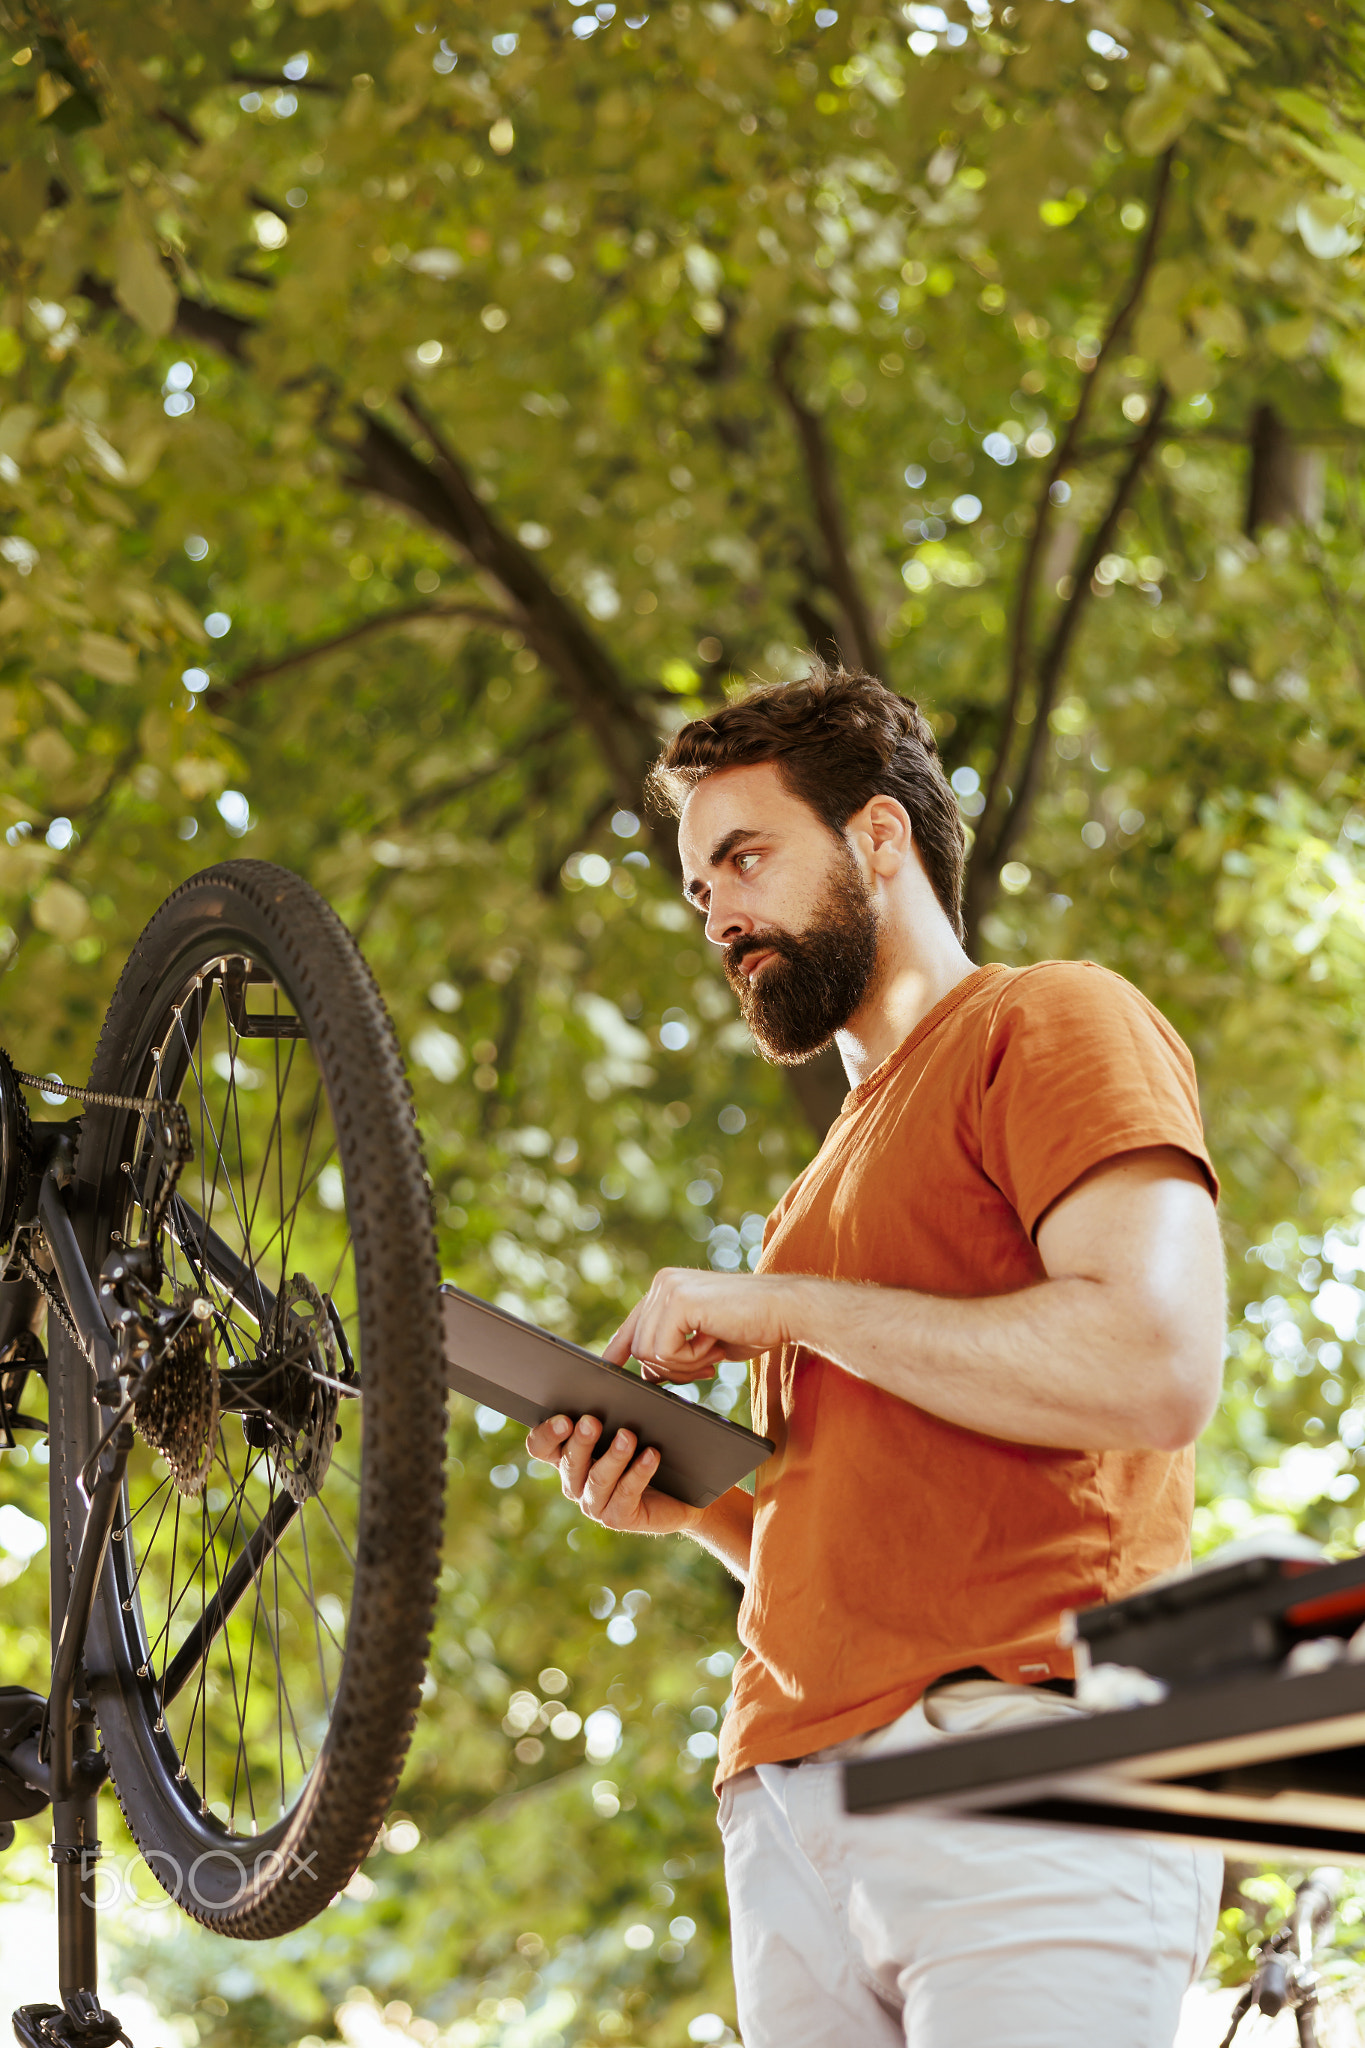 Man fixing bicycle wheel with tablet